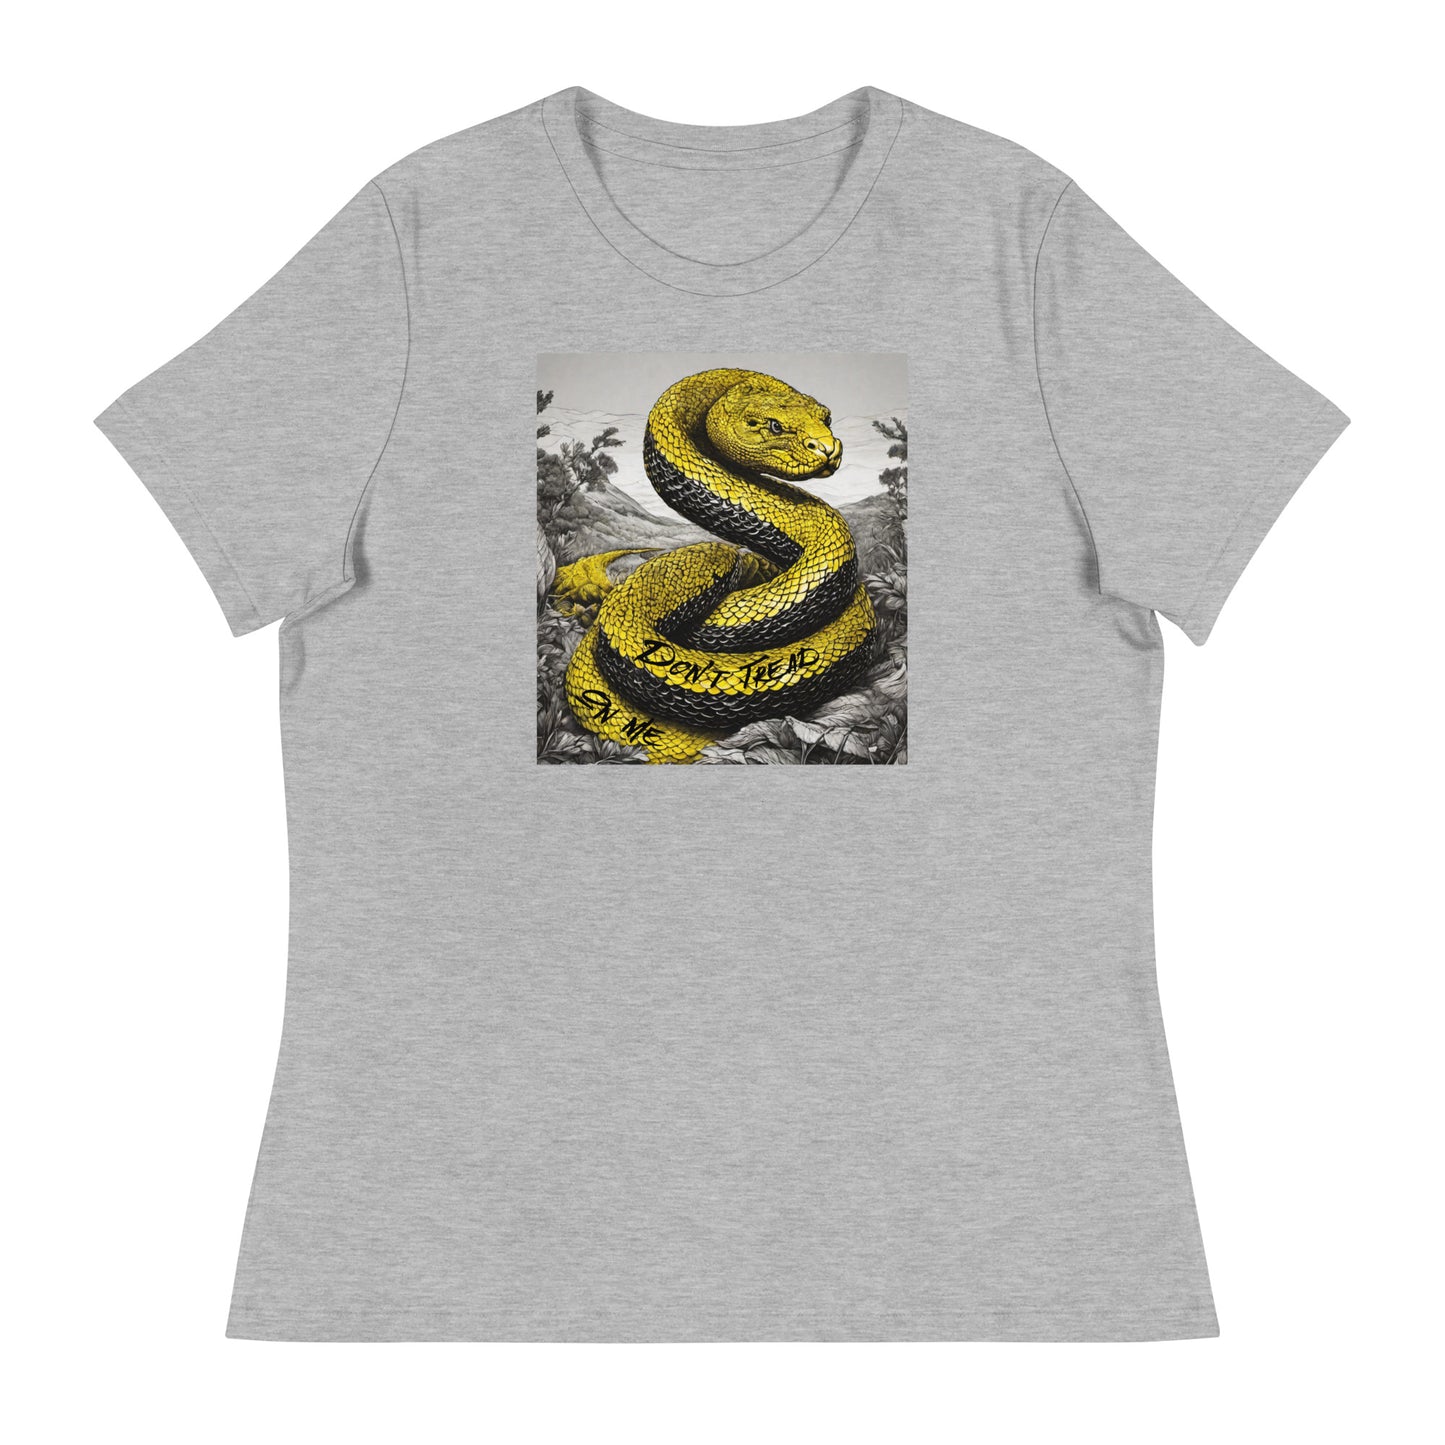 Don't Tread On Me Women's T-Shirt Athletic Heather